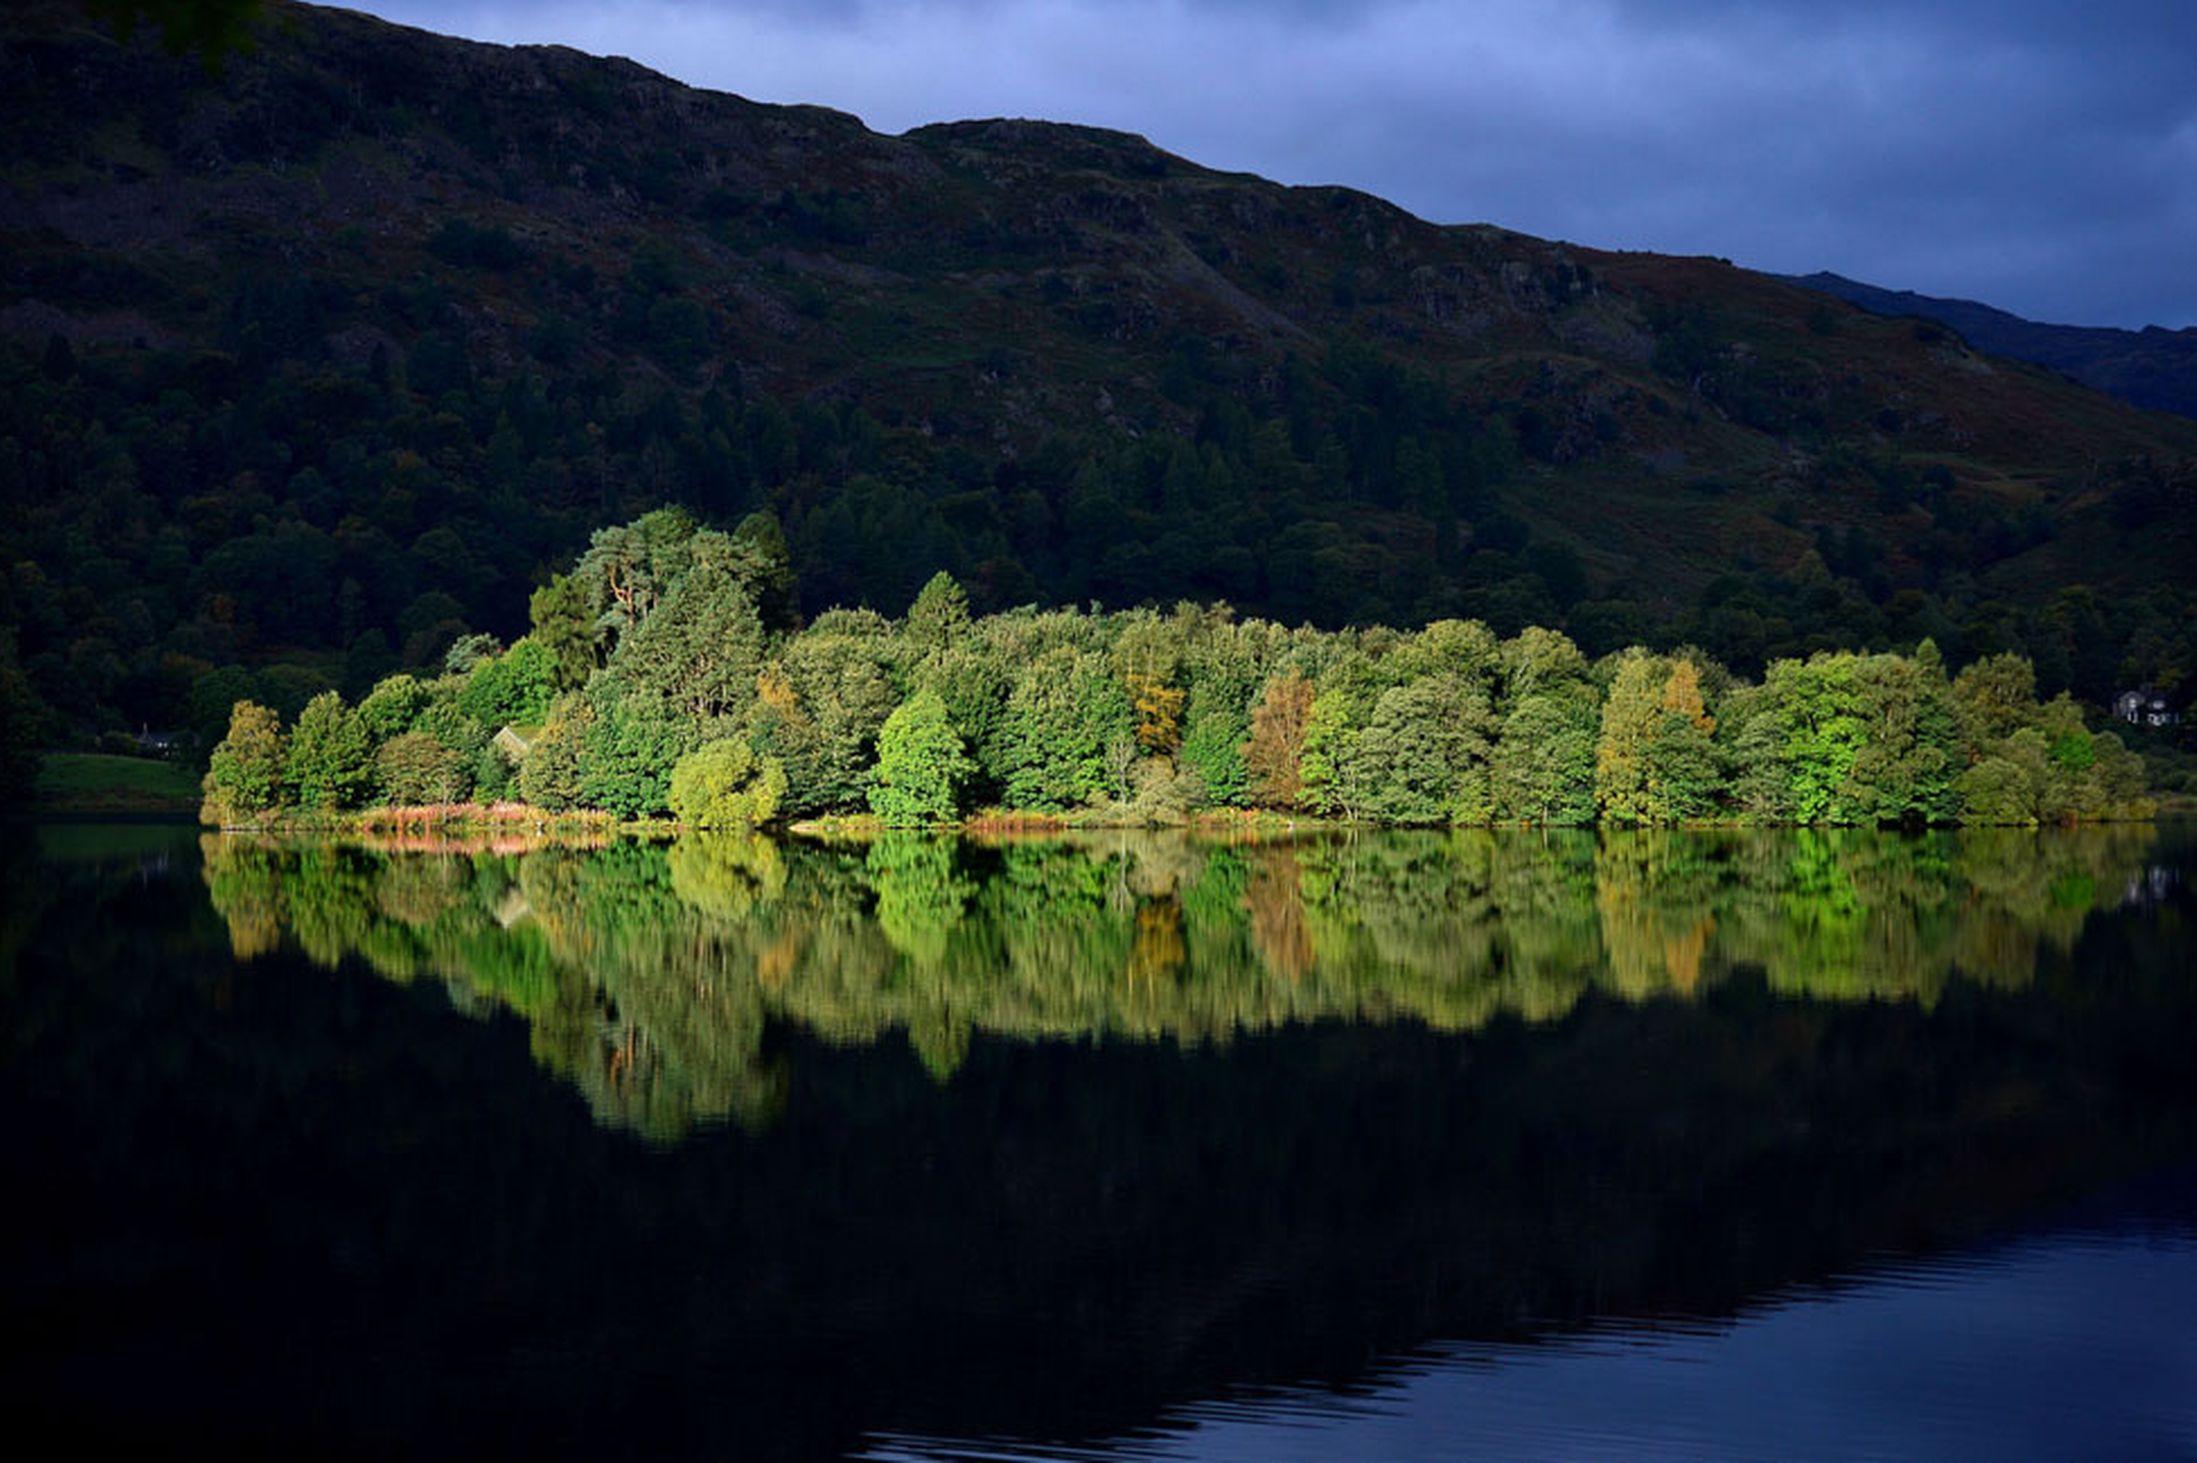 The-Autumn-sun-lights-up-an-island-on-Grasmere-Lake-in-the-Lake-District-Cumbria-6t-October-2641161